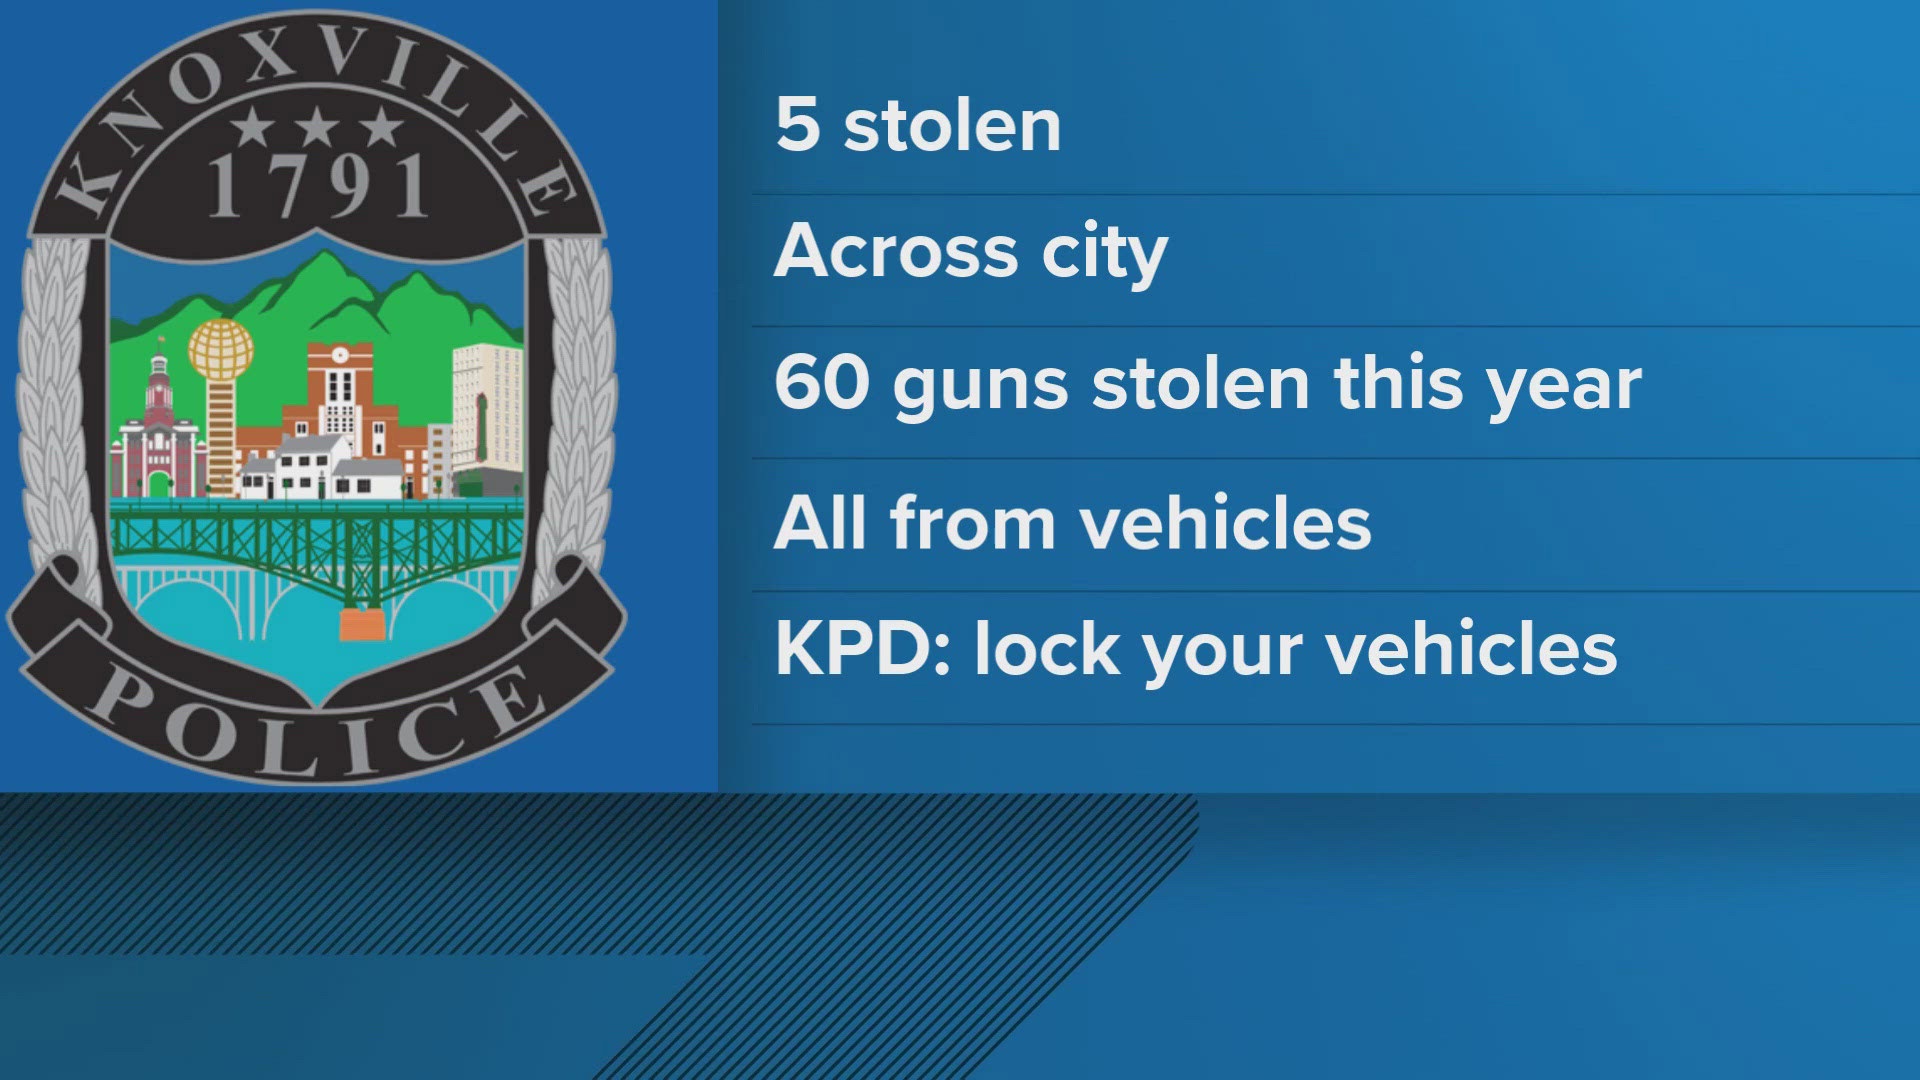 ​Over 60 firearms have been stolen from cars in Knoxville so far this year, the Knoxville Police Department said.